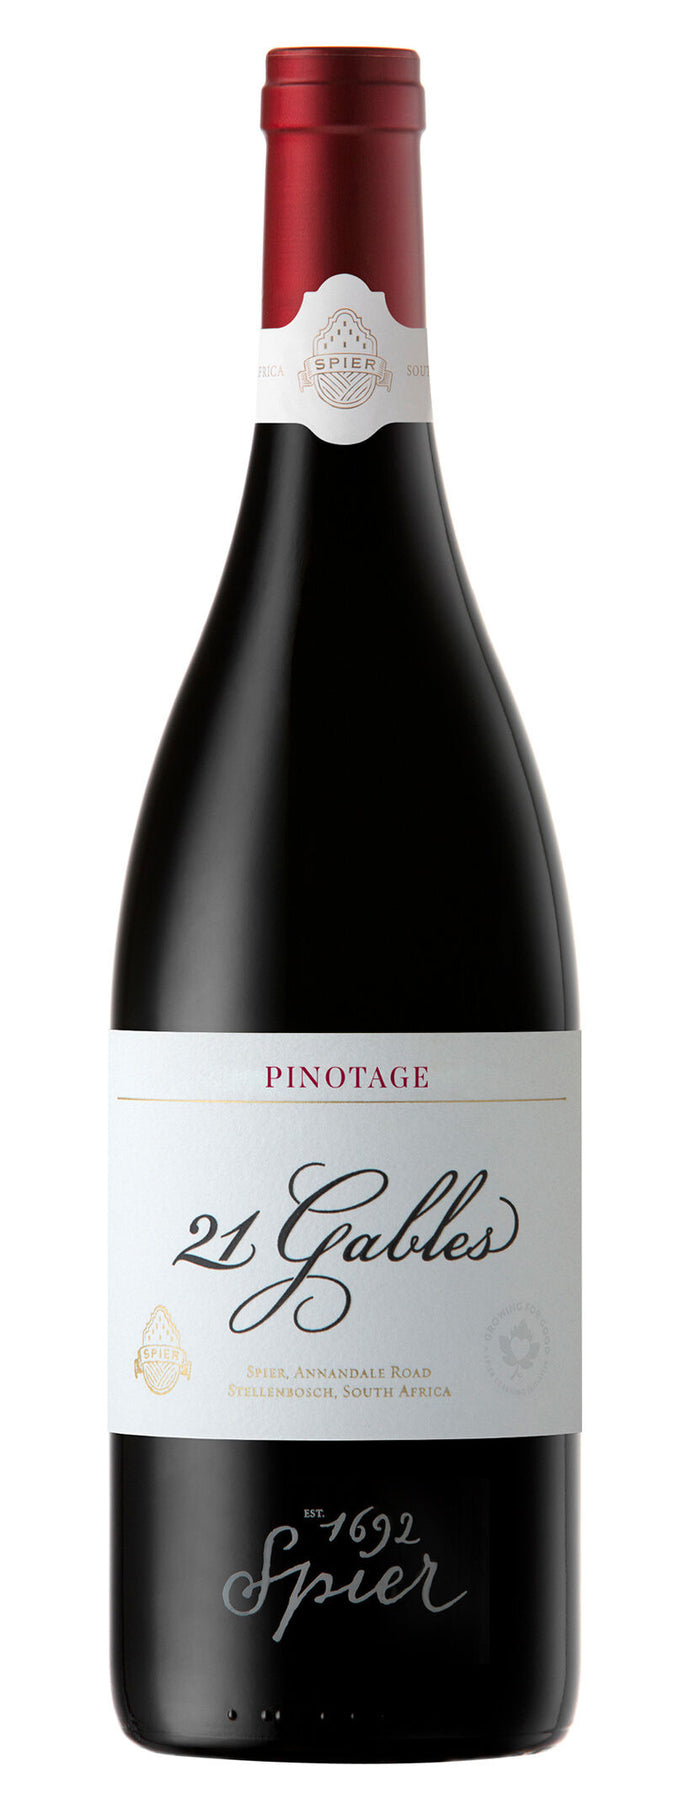 Spier 21 Gables Pinotage Magnum